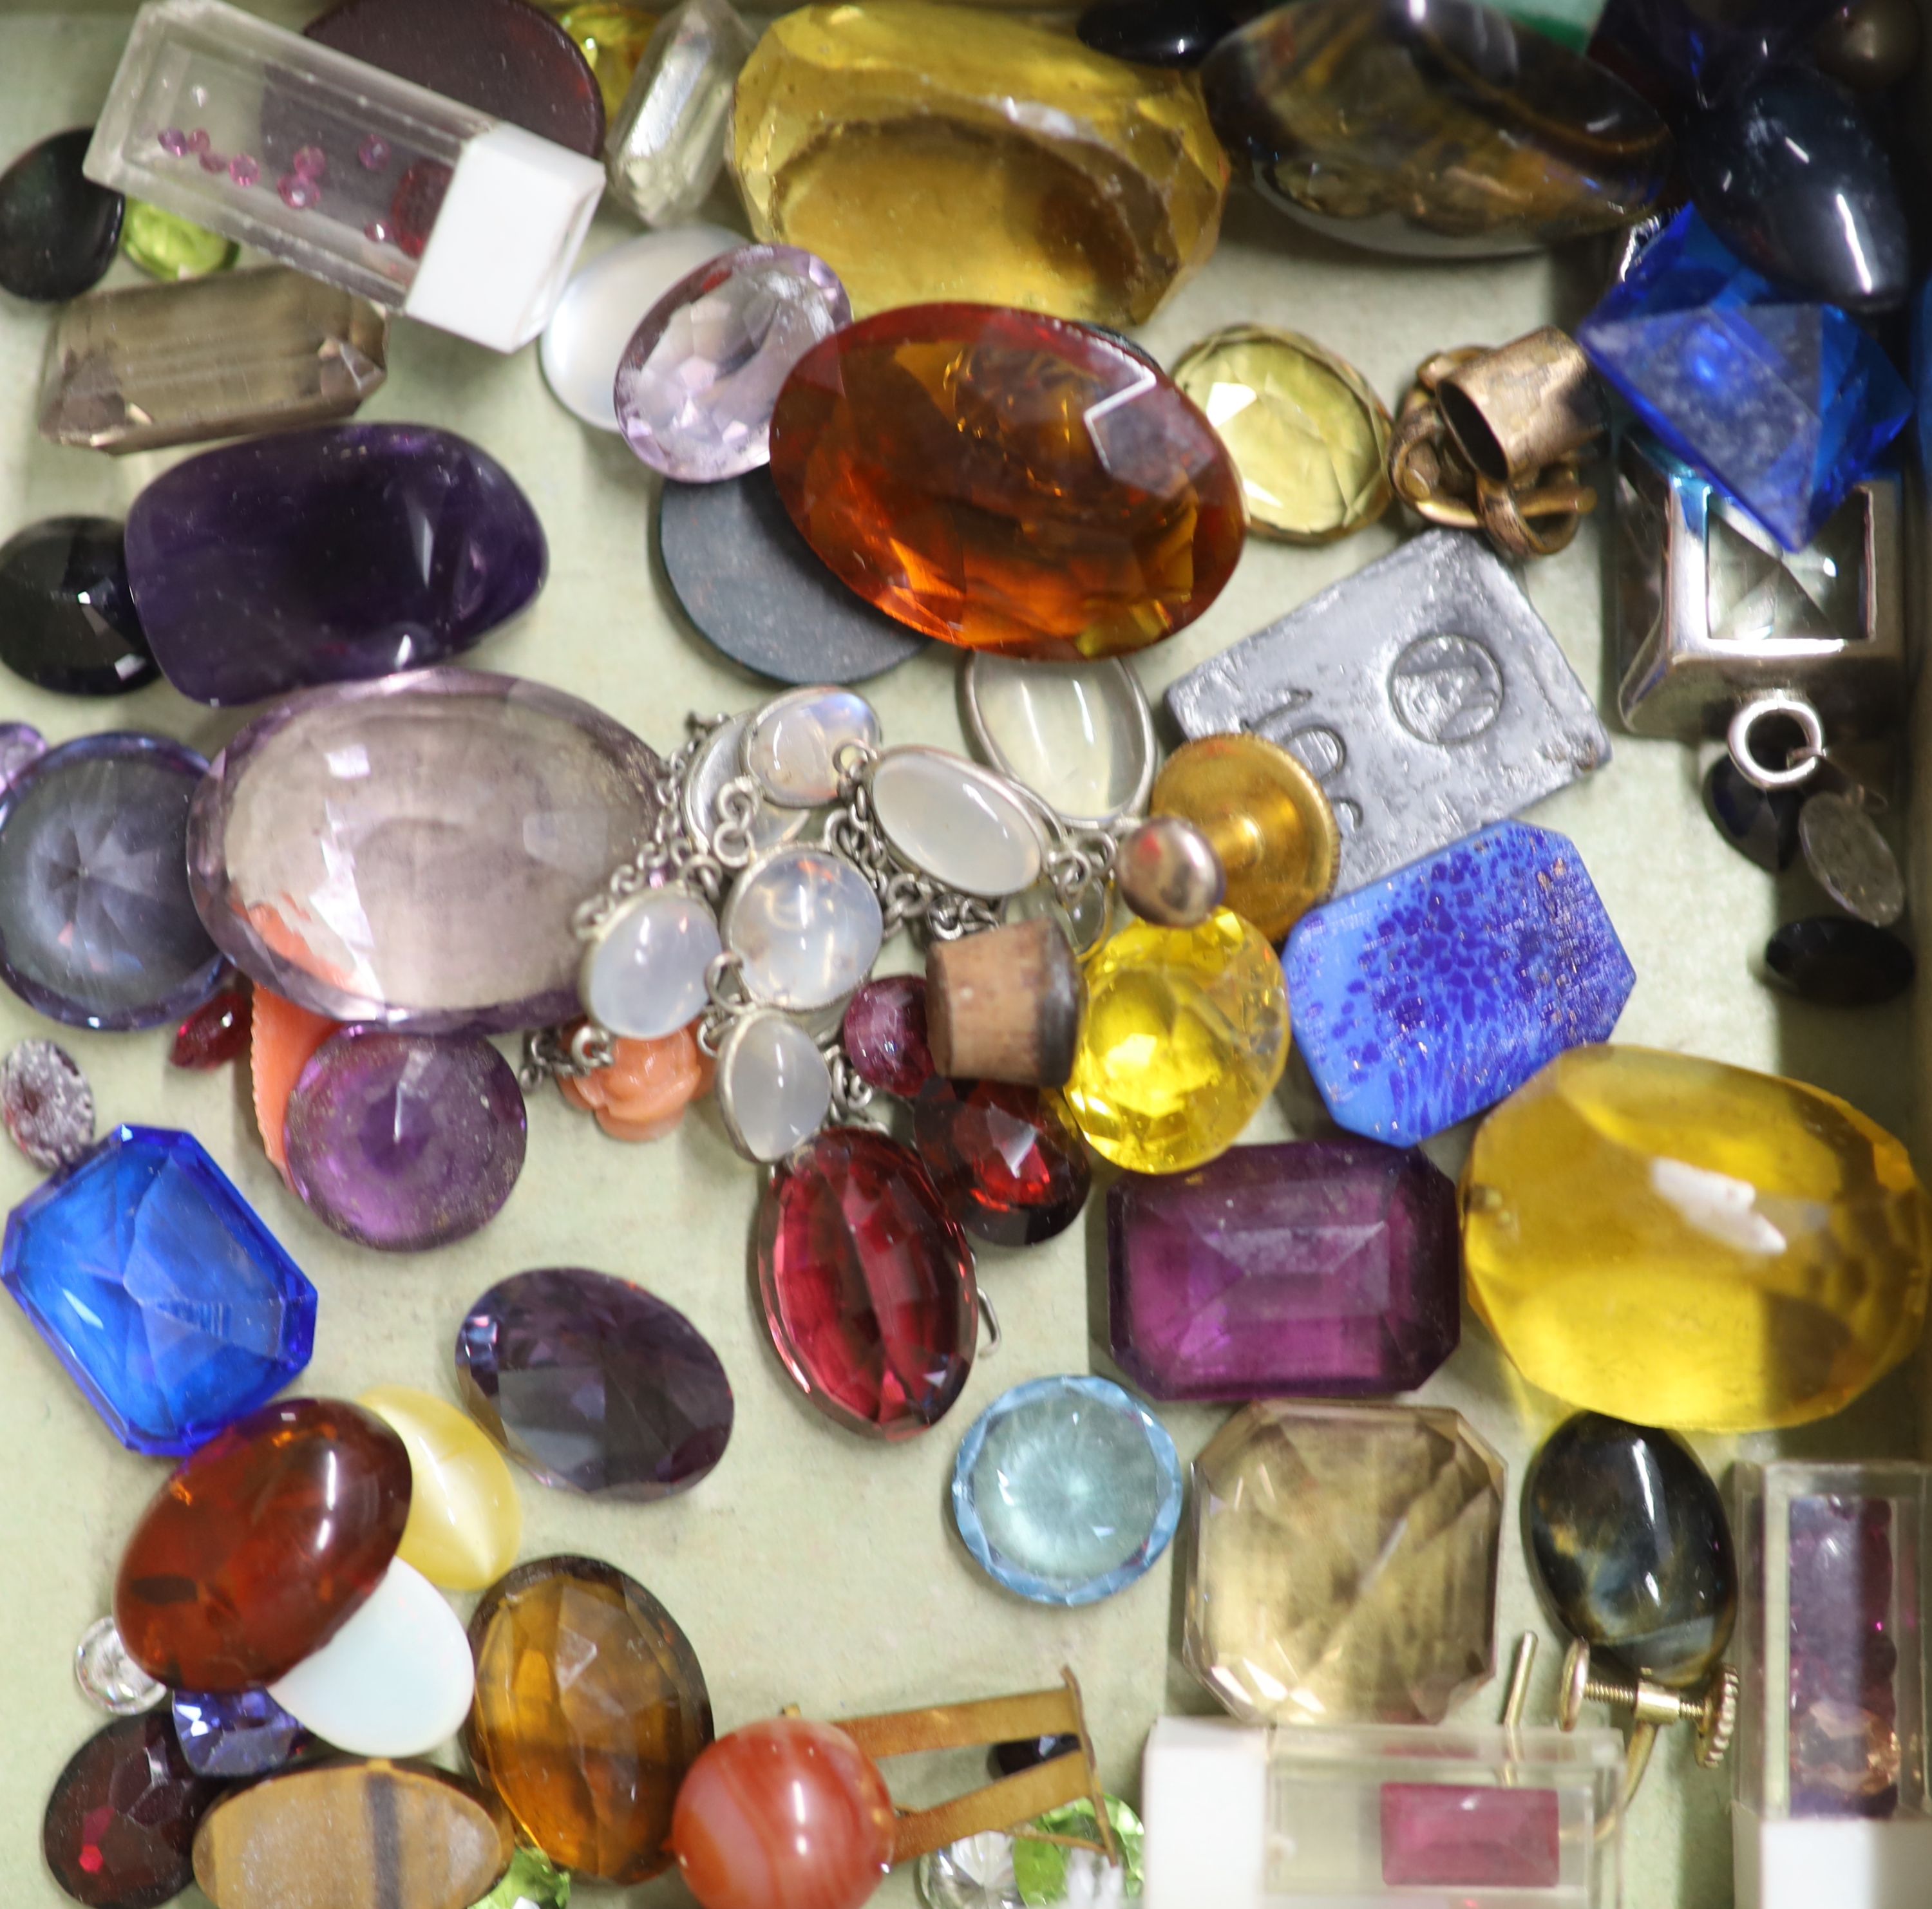 A quantity of assorted loose cut and cabochon gemstones including amethyst, citrine, opal and tourmaline.